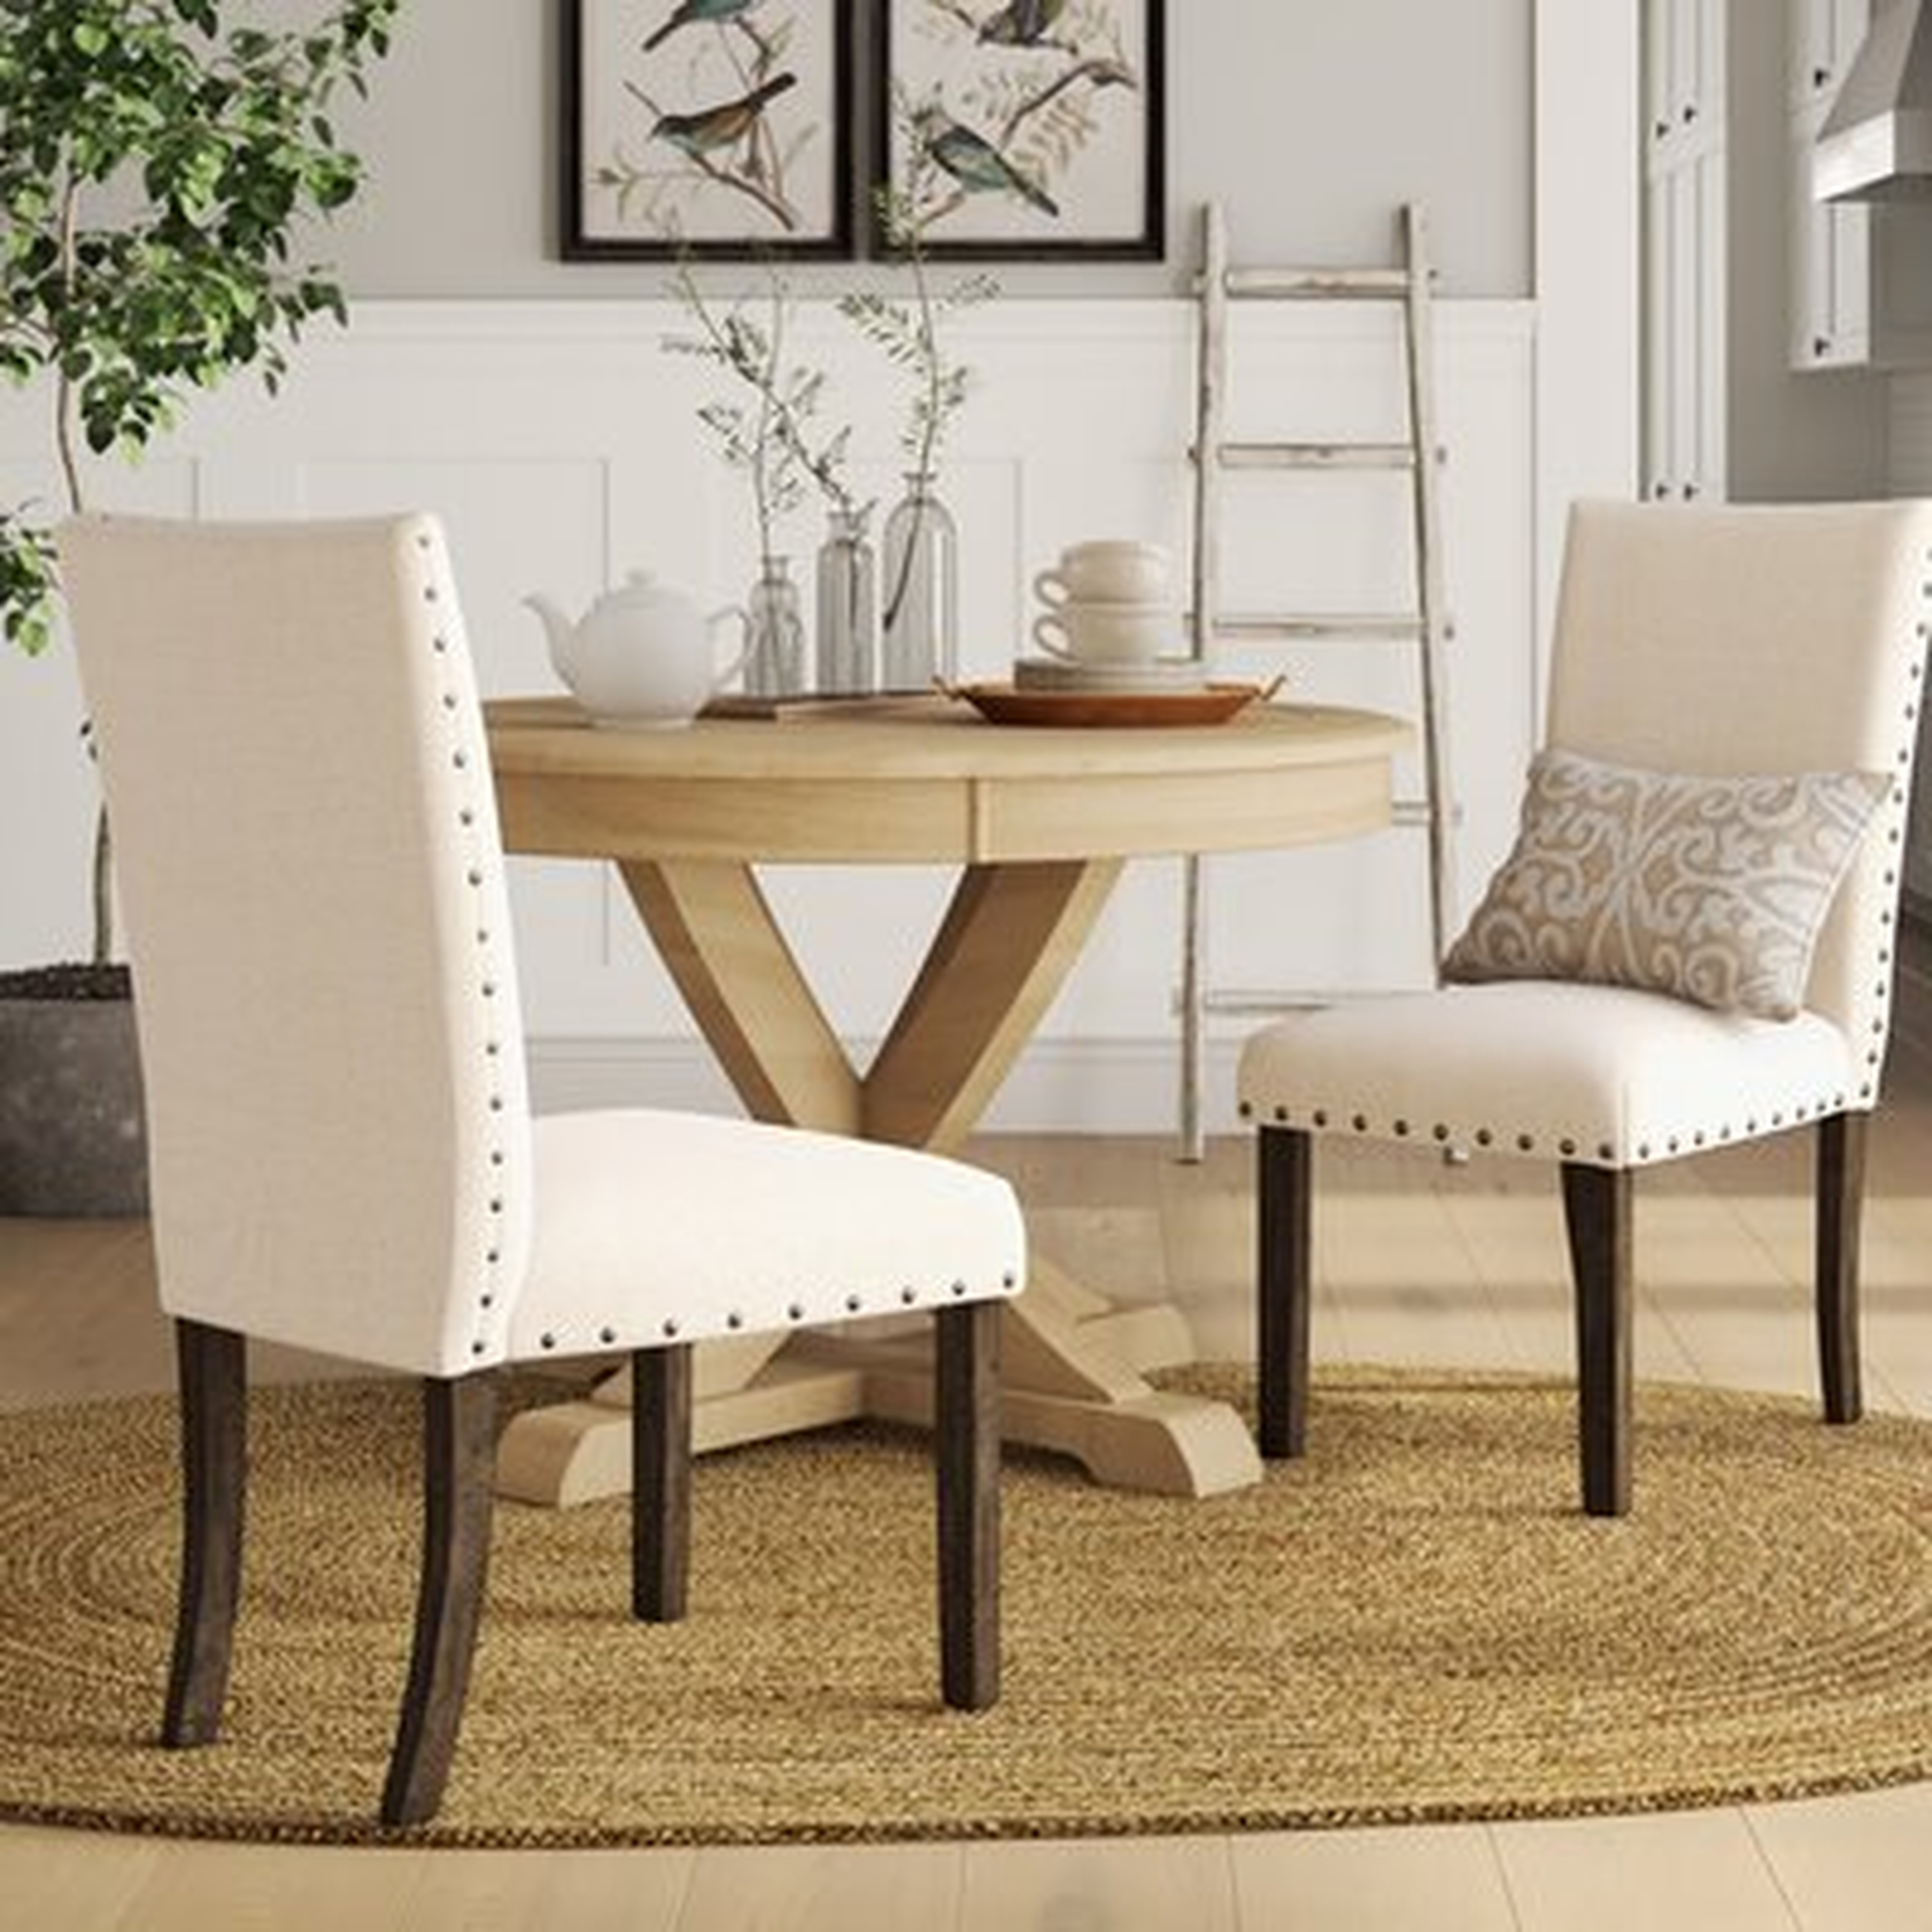 Ismay Upholstered Dining Chair - Set of 2 - Birch Lane